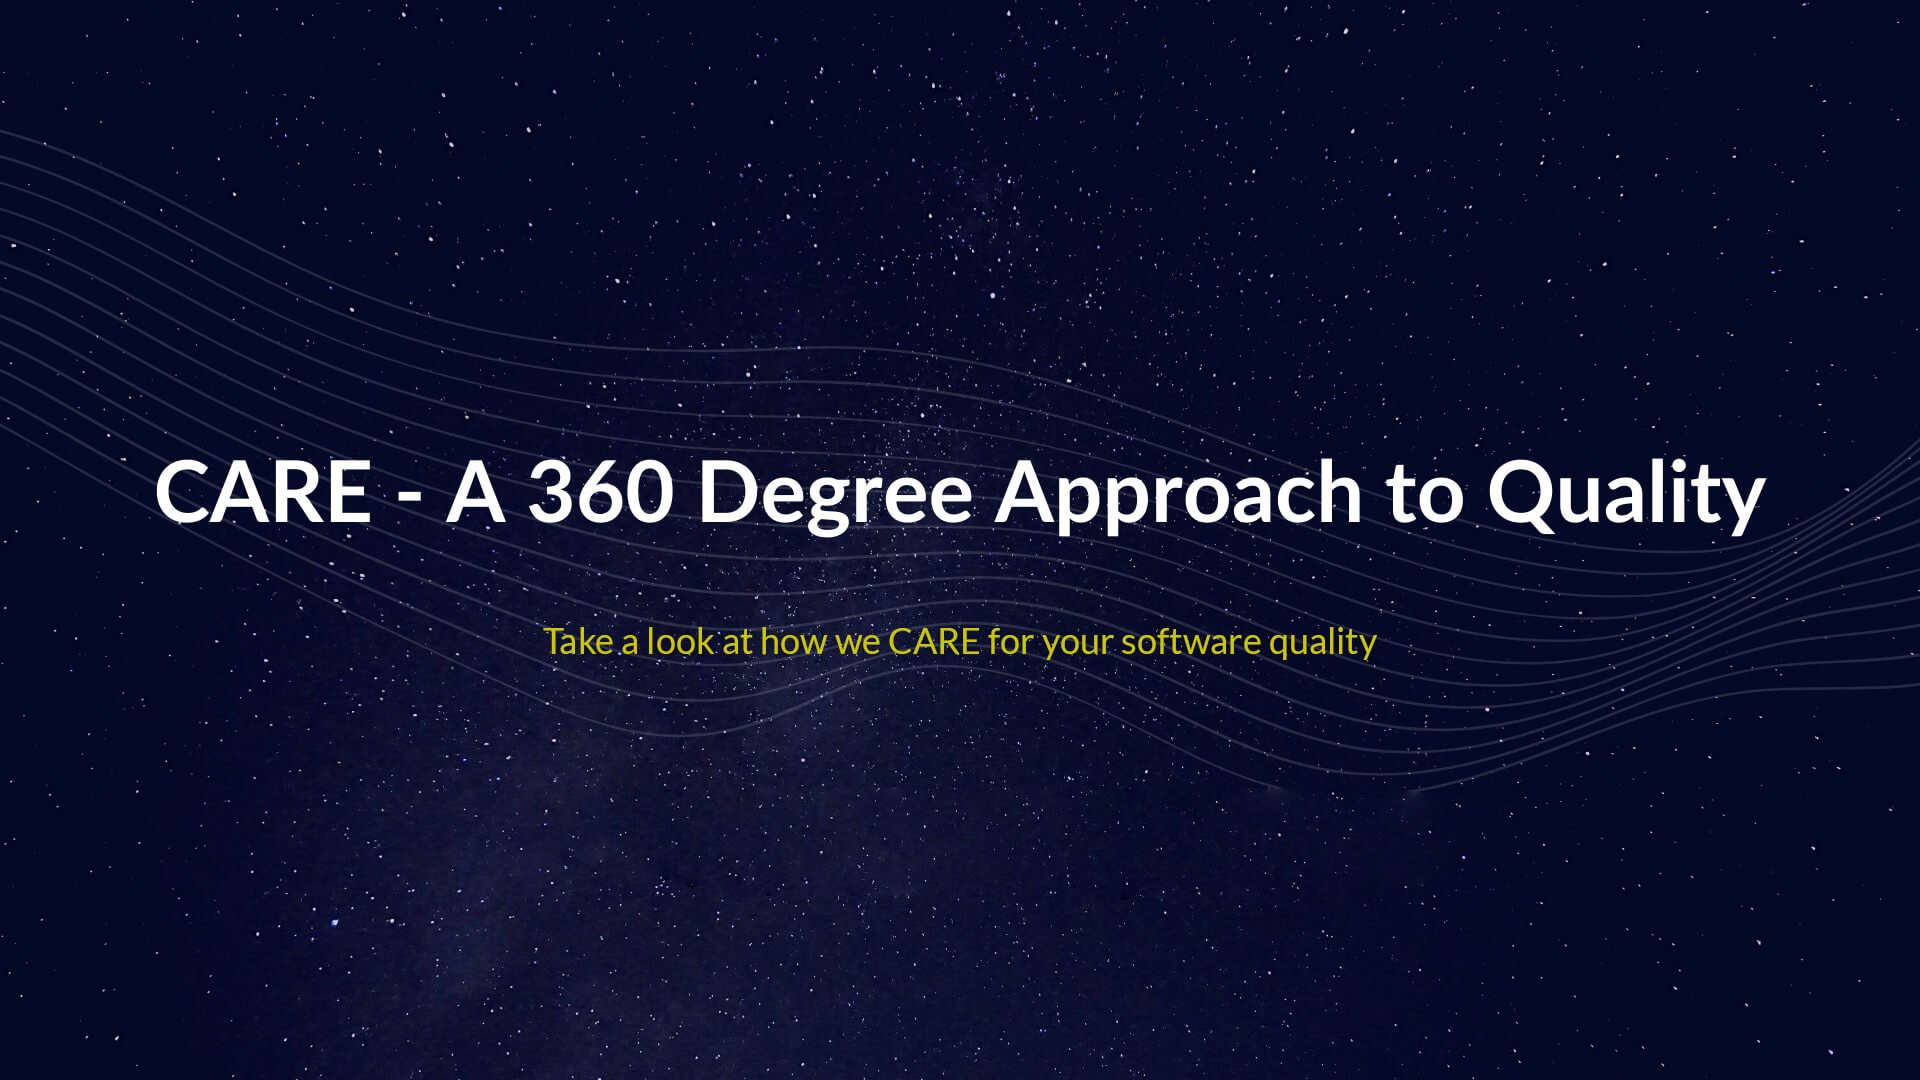 CARE(Check, Act, Refine, Evolve) – A 360 Degree Approach to Quality